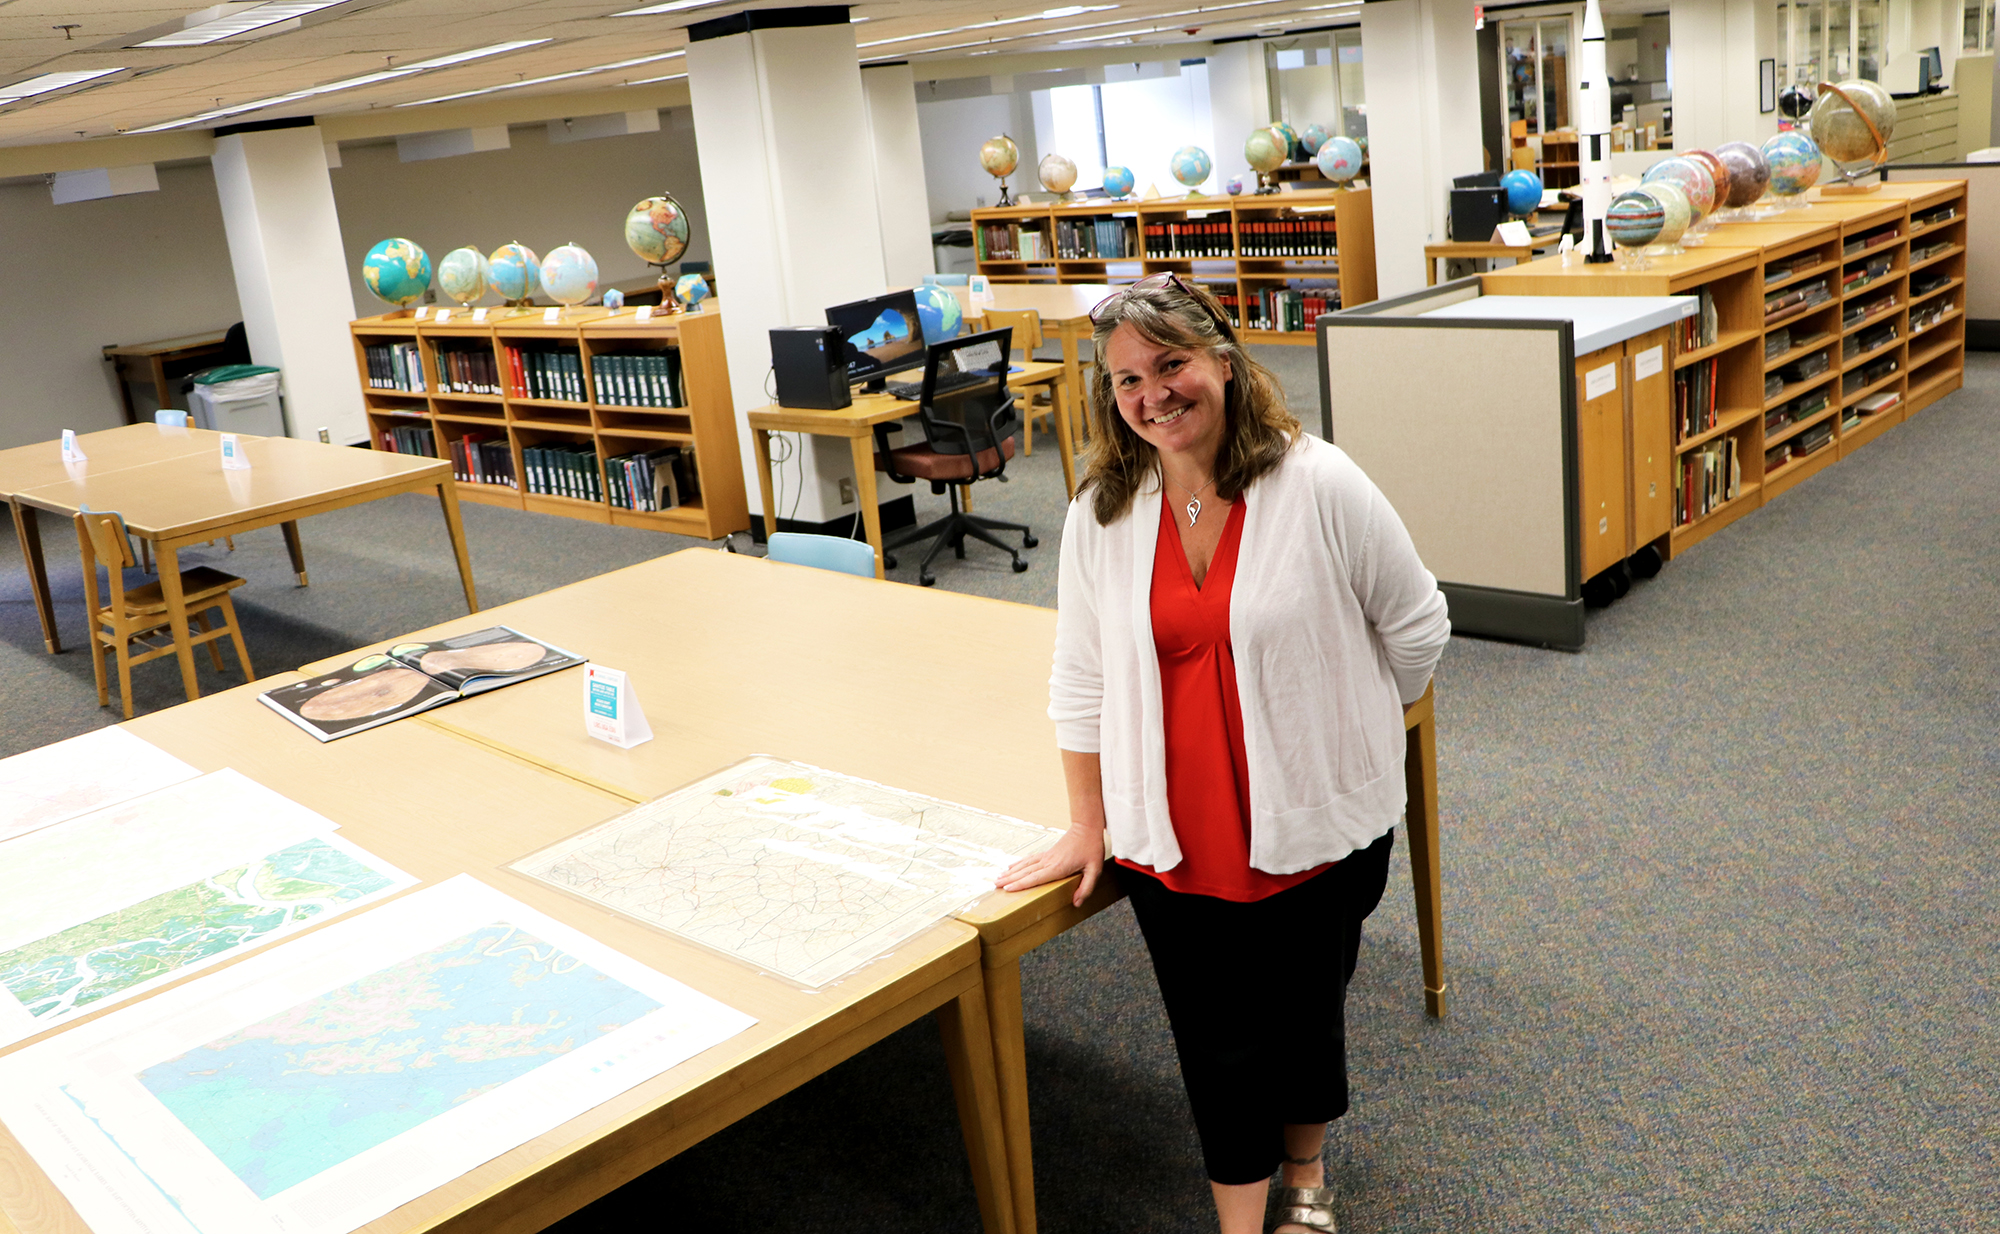 Valerie Glenn poses in front of globes and tables in the Map and Government Information Library at UGA